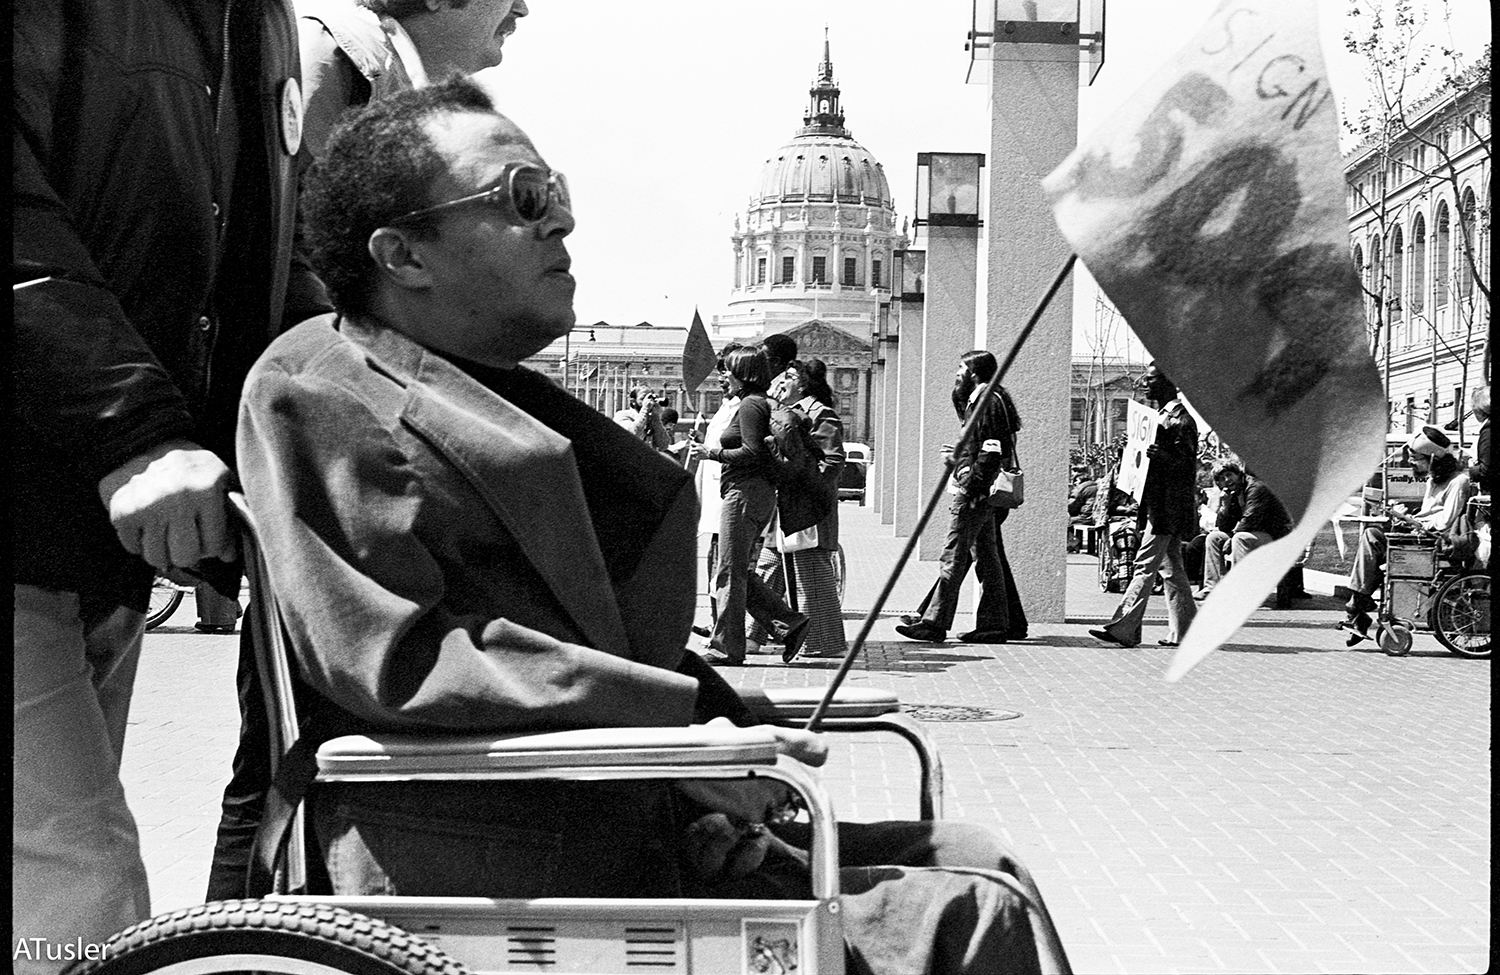 Black and white photo of profile view of a black man in sunglasses using manual wheelchair. A rotunda of a building is in the background.